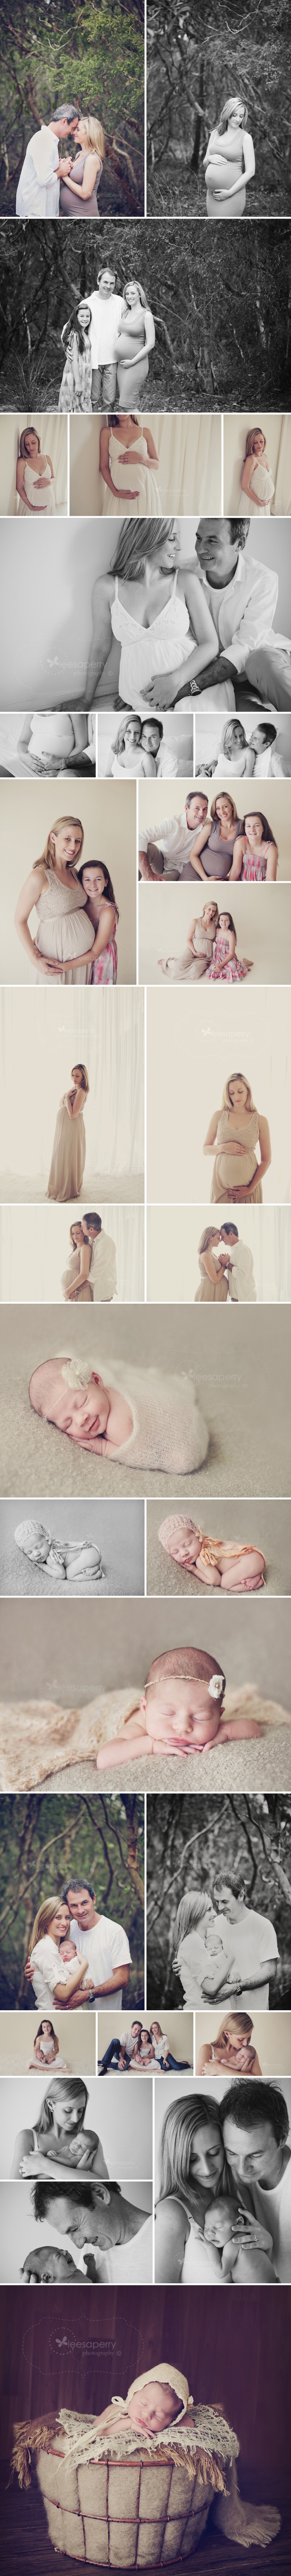 Beautiful maternity and newborn photos with some shots outside in the bush